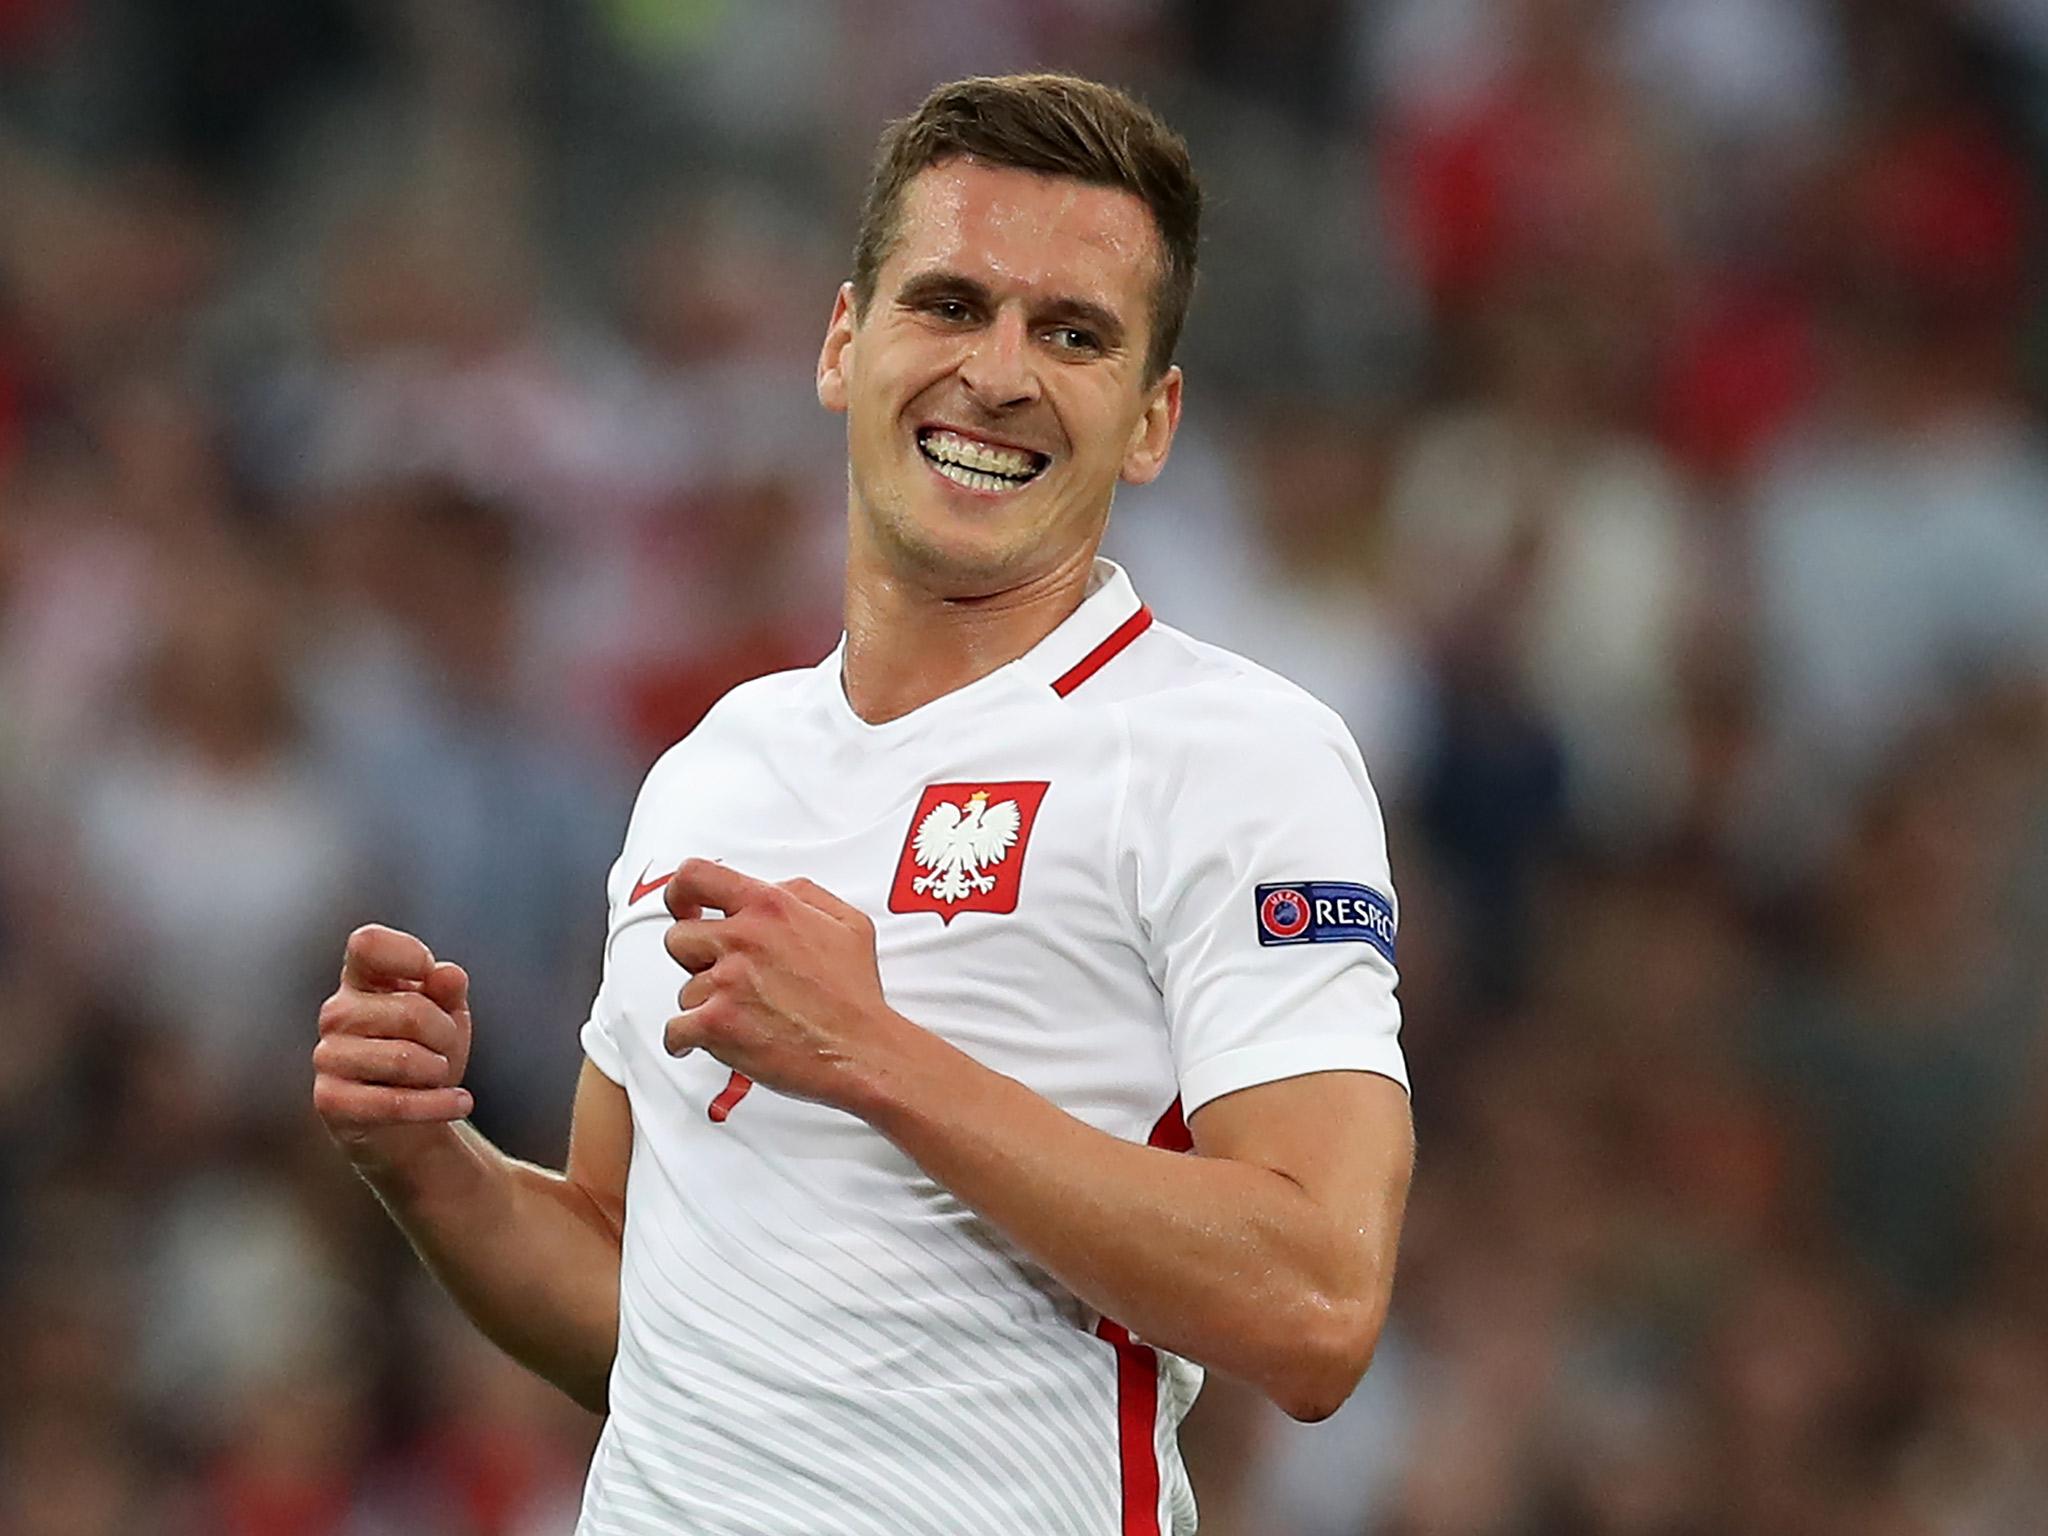 Milik will be able to receive messages from fans